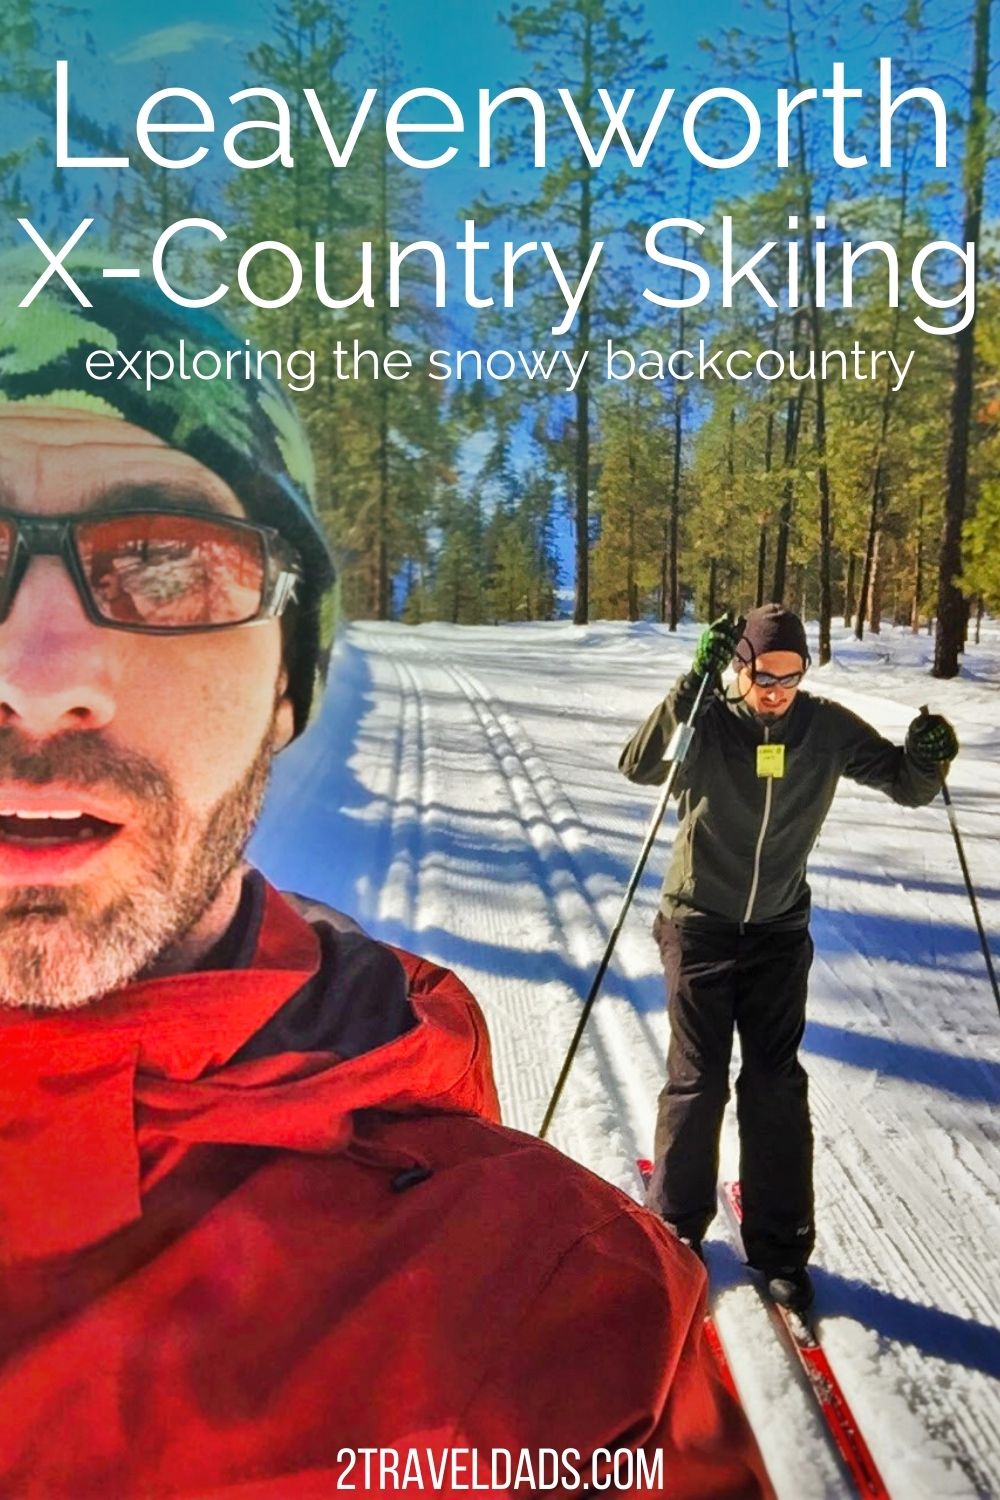 Cross country skiing in Leavenworth is a great way to explore the snowy backcountry in winter. Find out where to ski, where to rent skiing gear and what to expect on the ski trails of Leavenworth, Washington.